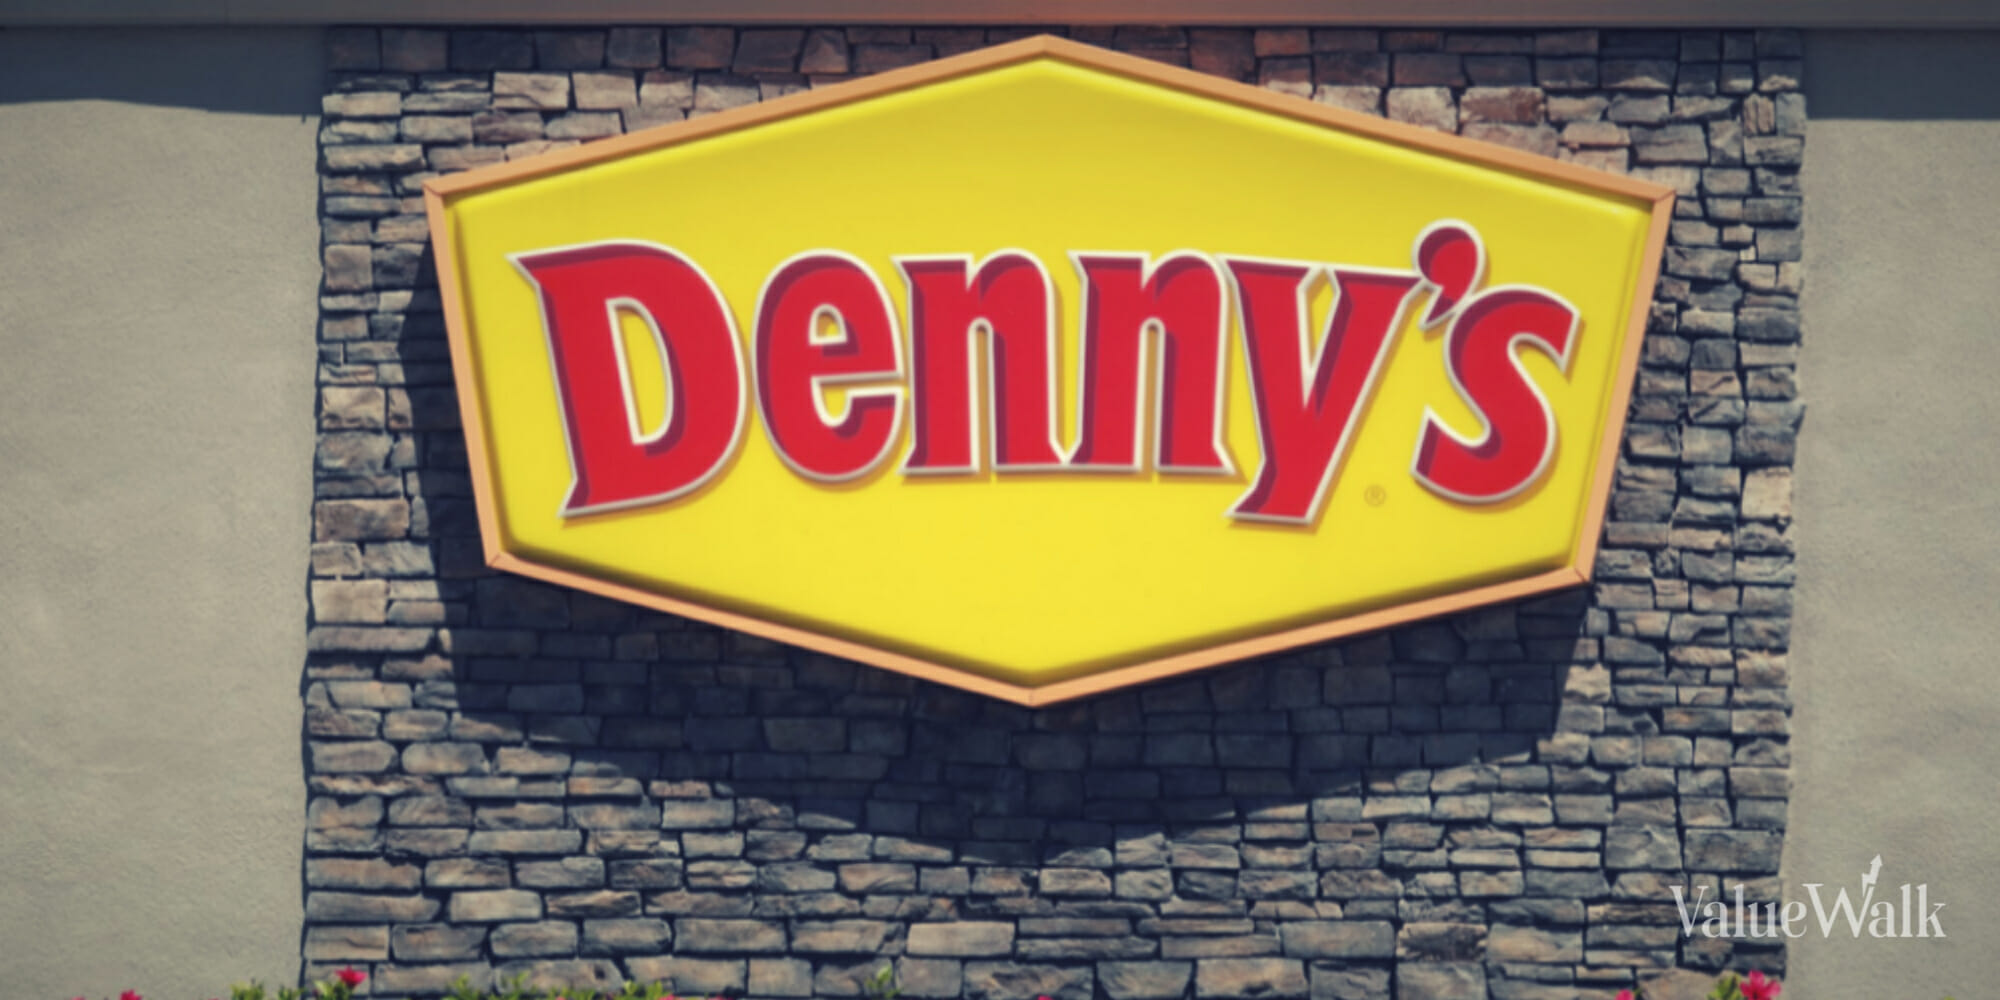 Why Options Traders May Be Targeting America's Diner Denny's